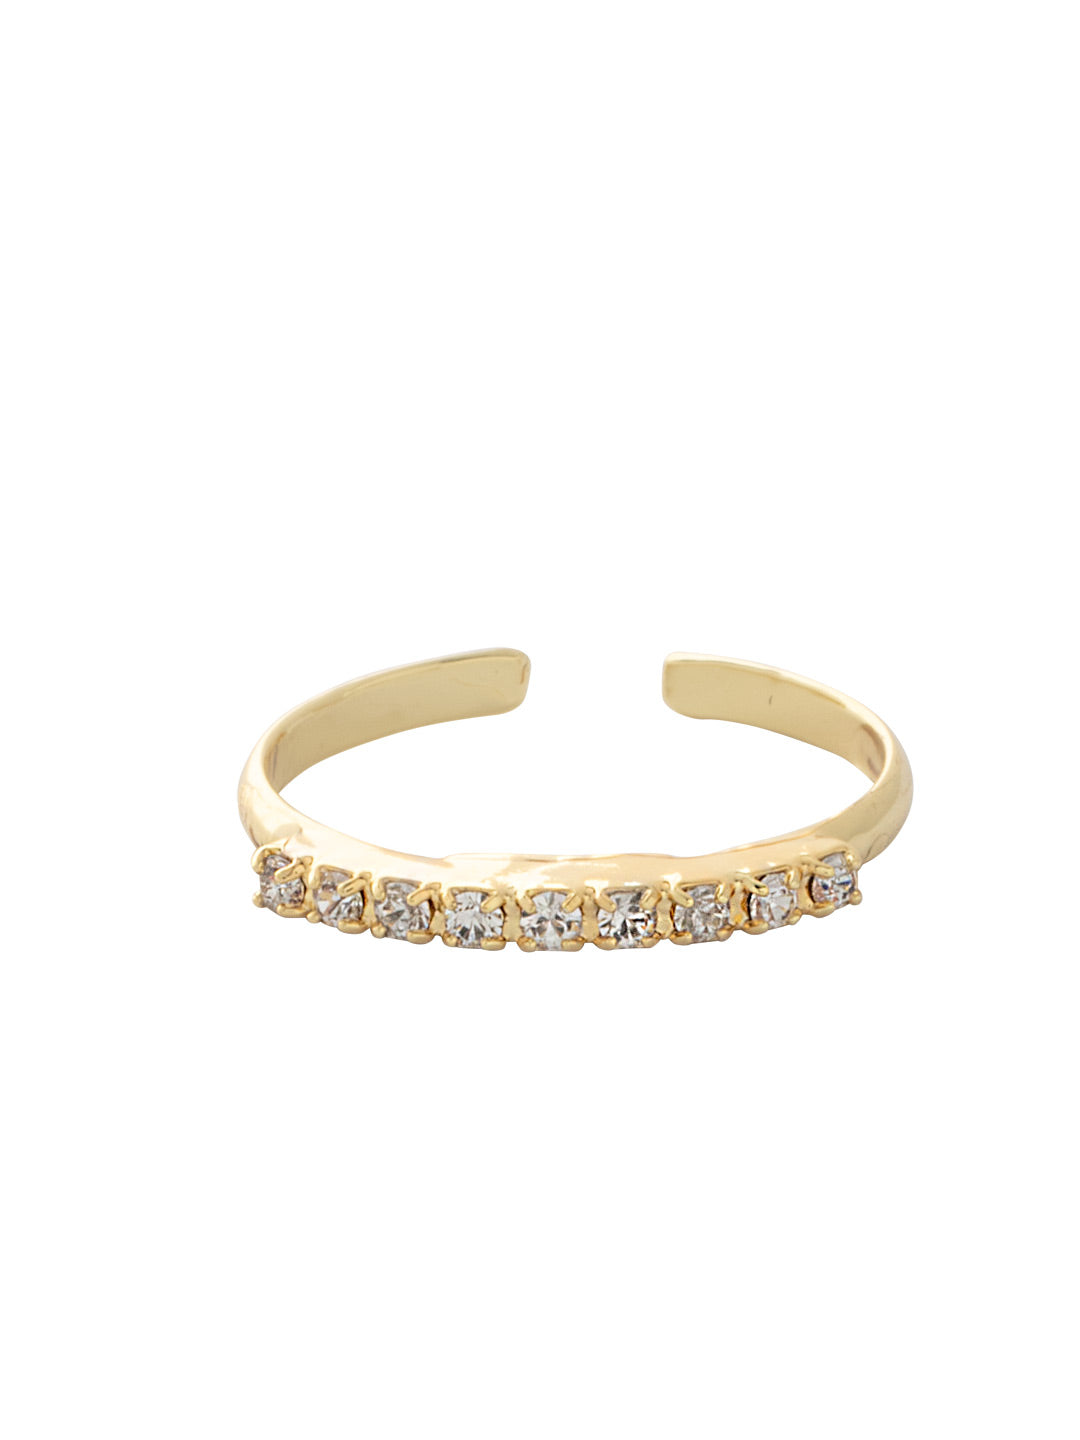 Evalina Band Ring - RFM57BGCRY - <p>The Evalina Band Ring features a row of small round cut crystals on an adjustable band. From Sorrelli's Crystal collection in our Bright Gold-tone finish.</p>